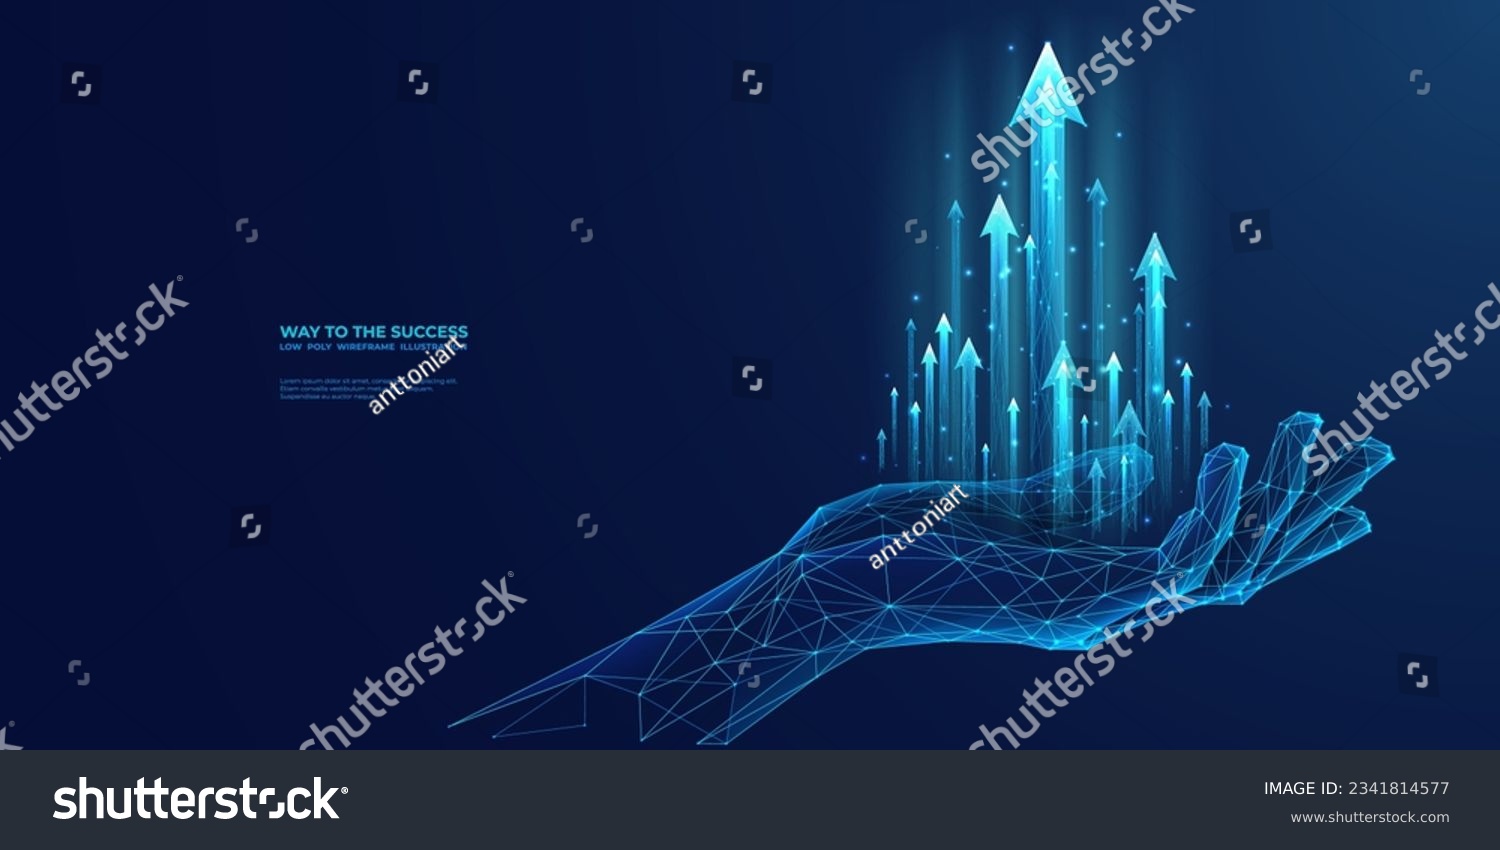 Abstract digital businessman hand holding rising arrows in futuristic style. Successful business and growth strategy concept. Low poly wireframe vector illustration on technological blue background. #2341814577